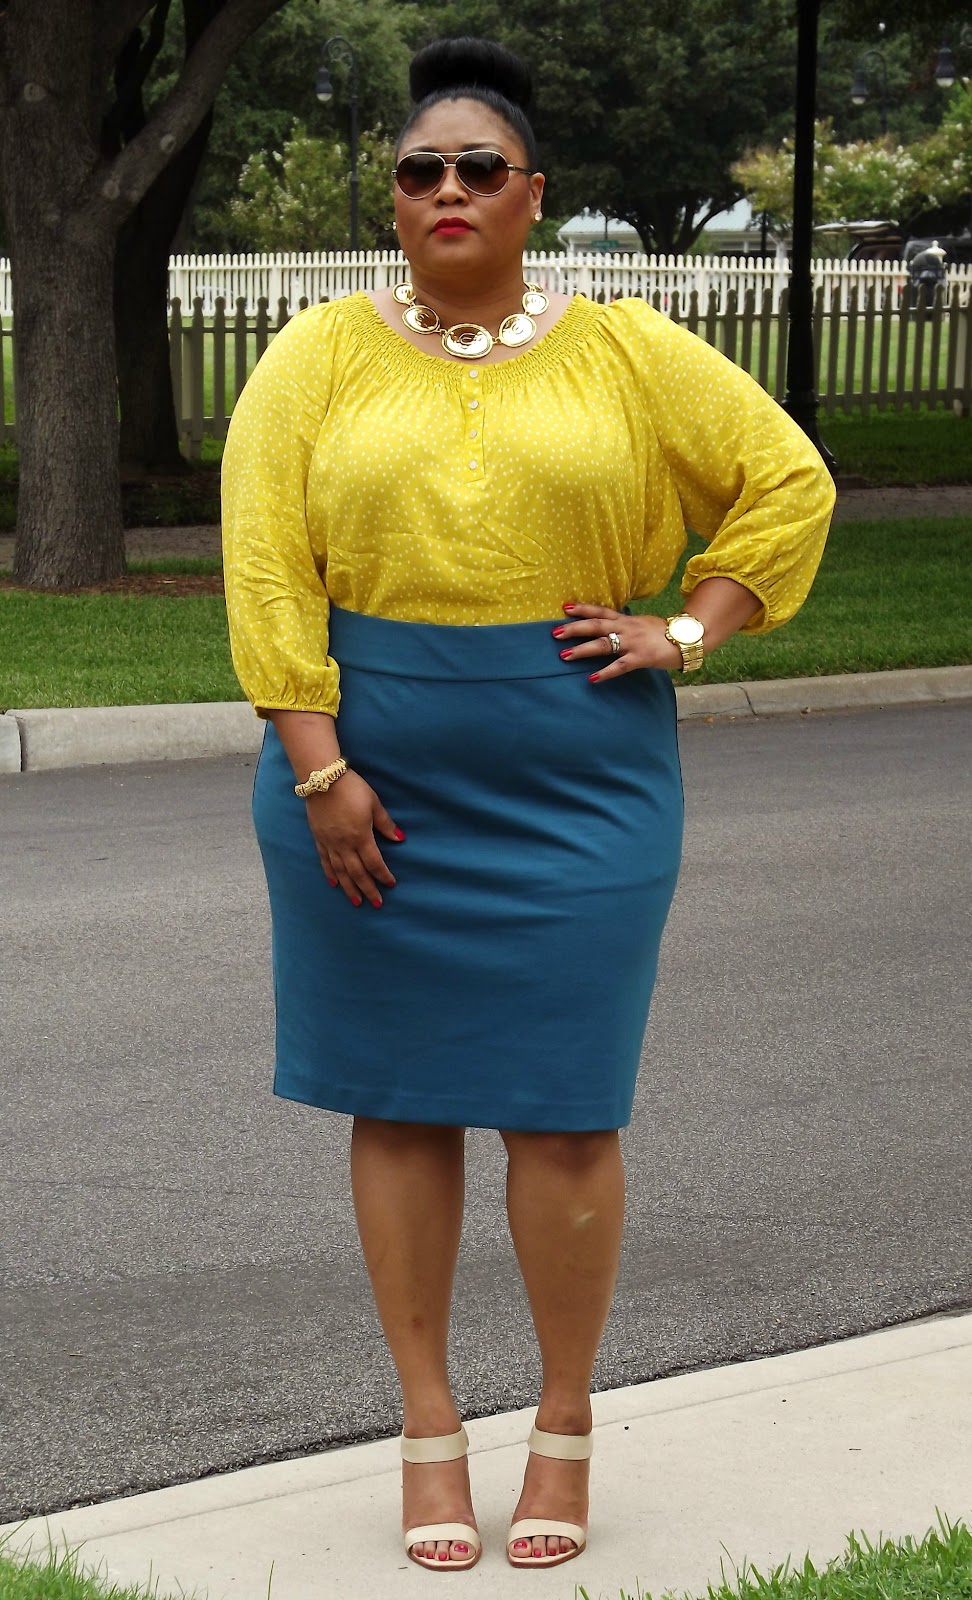 Rez to the City: TEAL WITH A SIDE OF MUSTARD